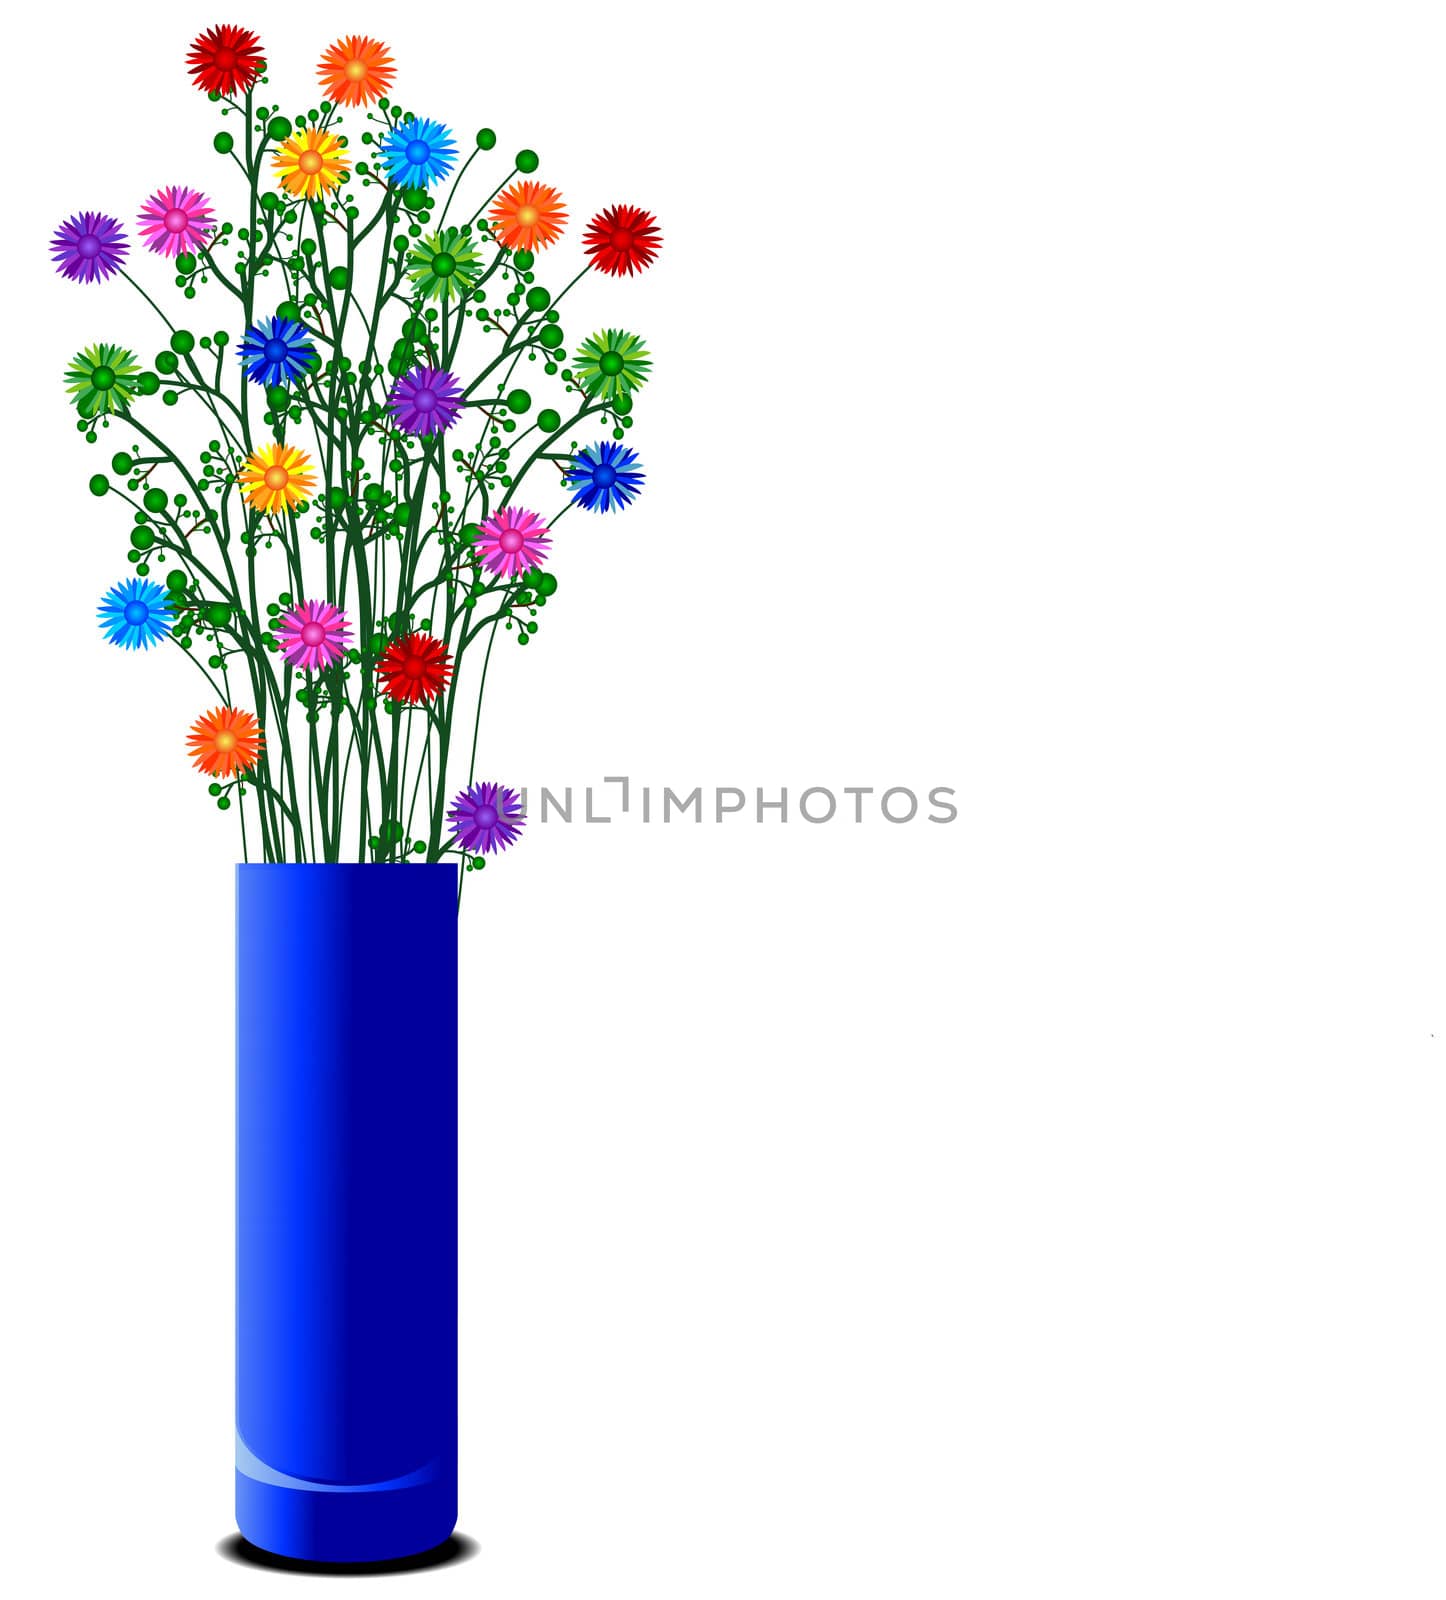 vase with colorful flowers